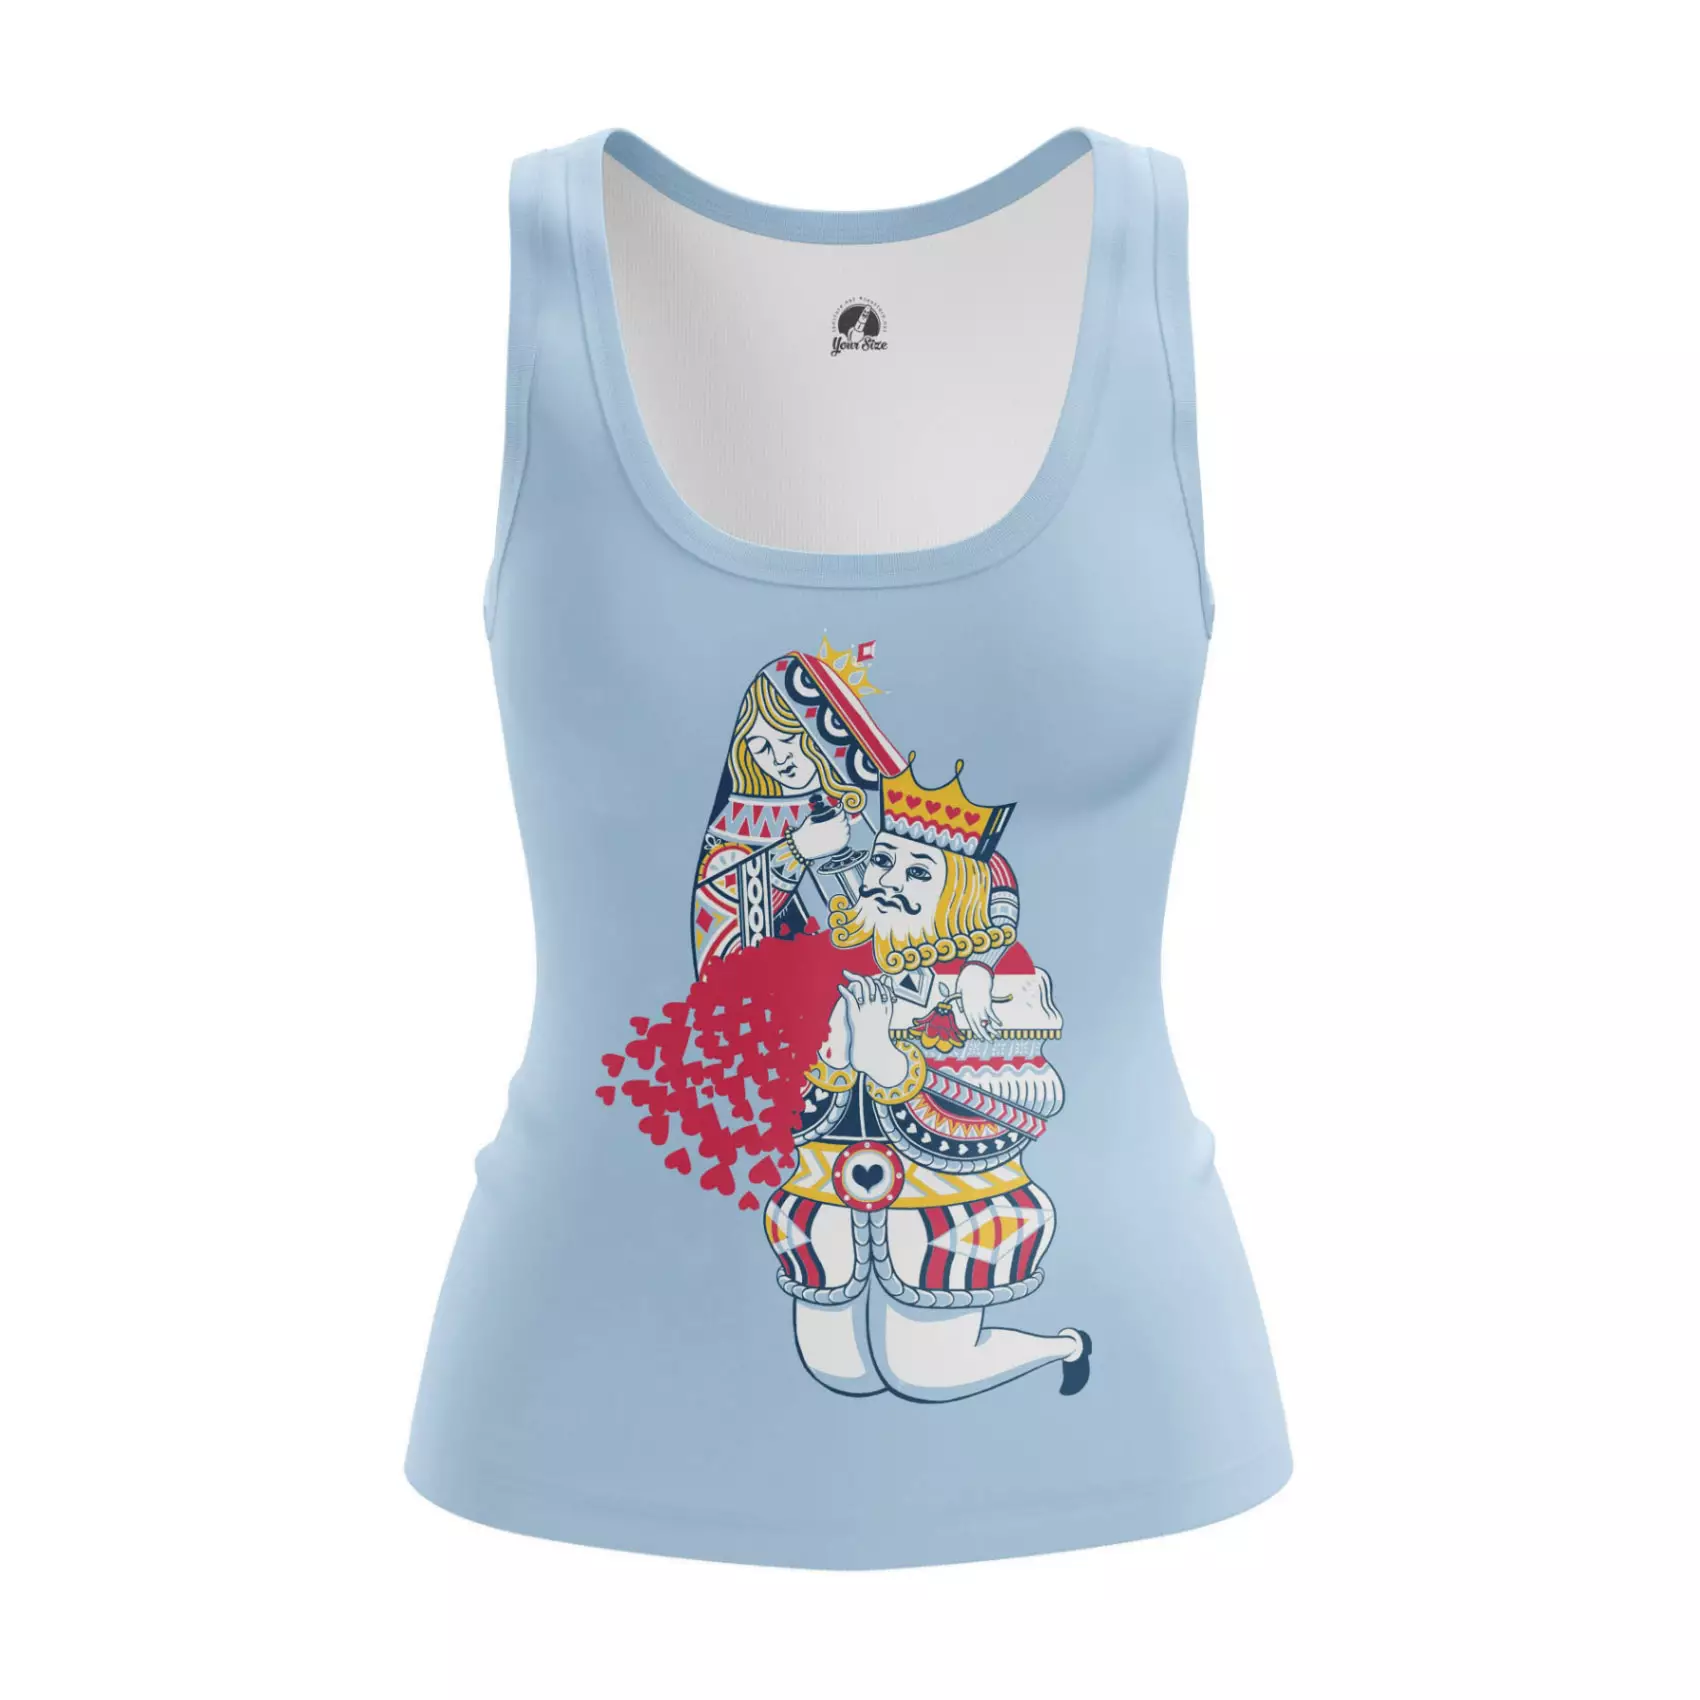 Women’s tank Regicide Cards Shirts Vest Idolstore - Merchandise and Collectibles Merchandise, Toys and Collectibles 2